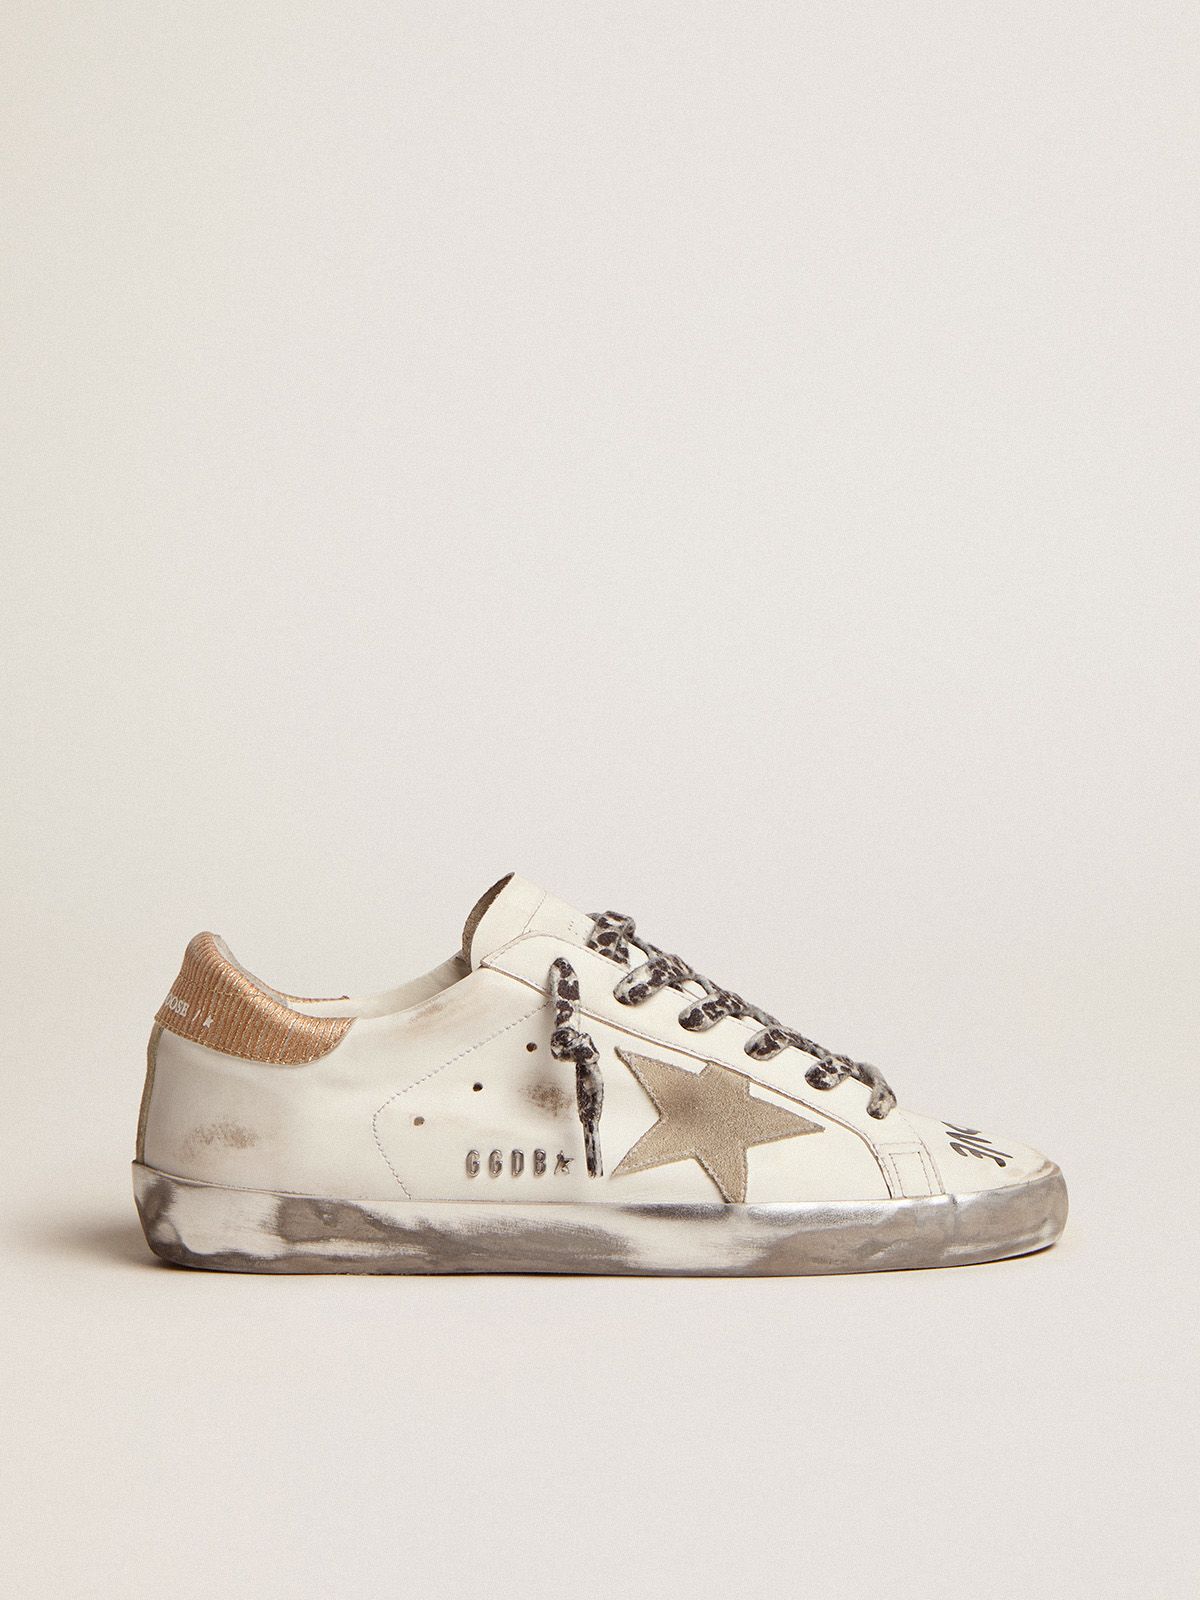 Sneakers Uomo Golden Goose Super-Star sneakers in white leather with ice-gray suede star and contrasting black lettering